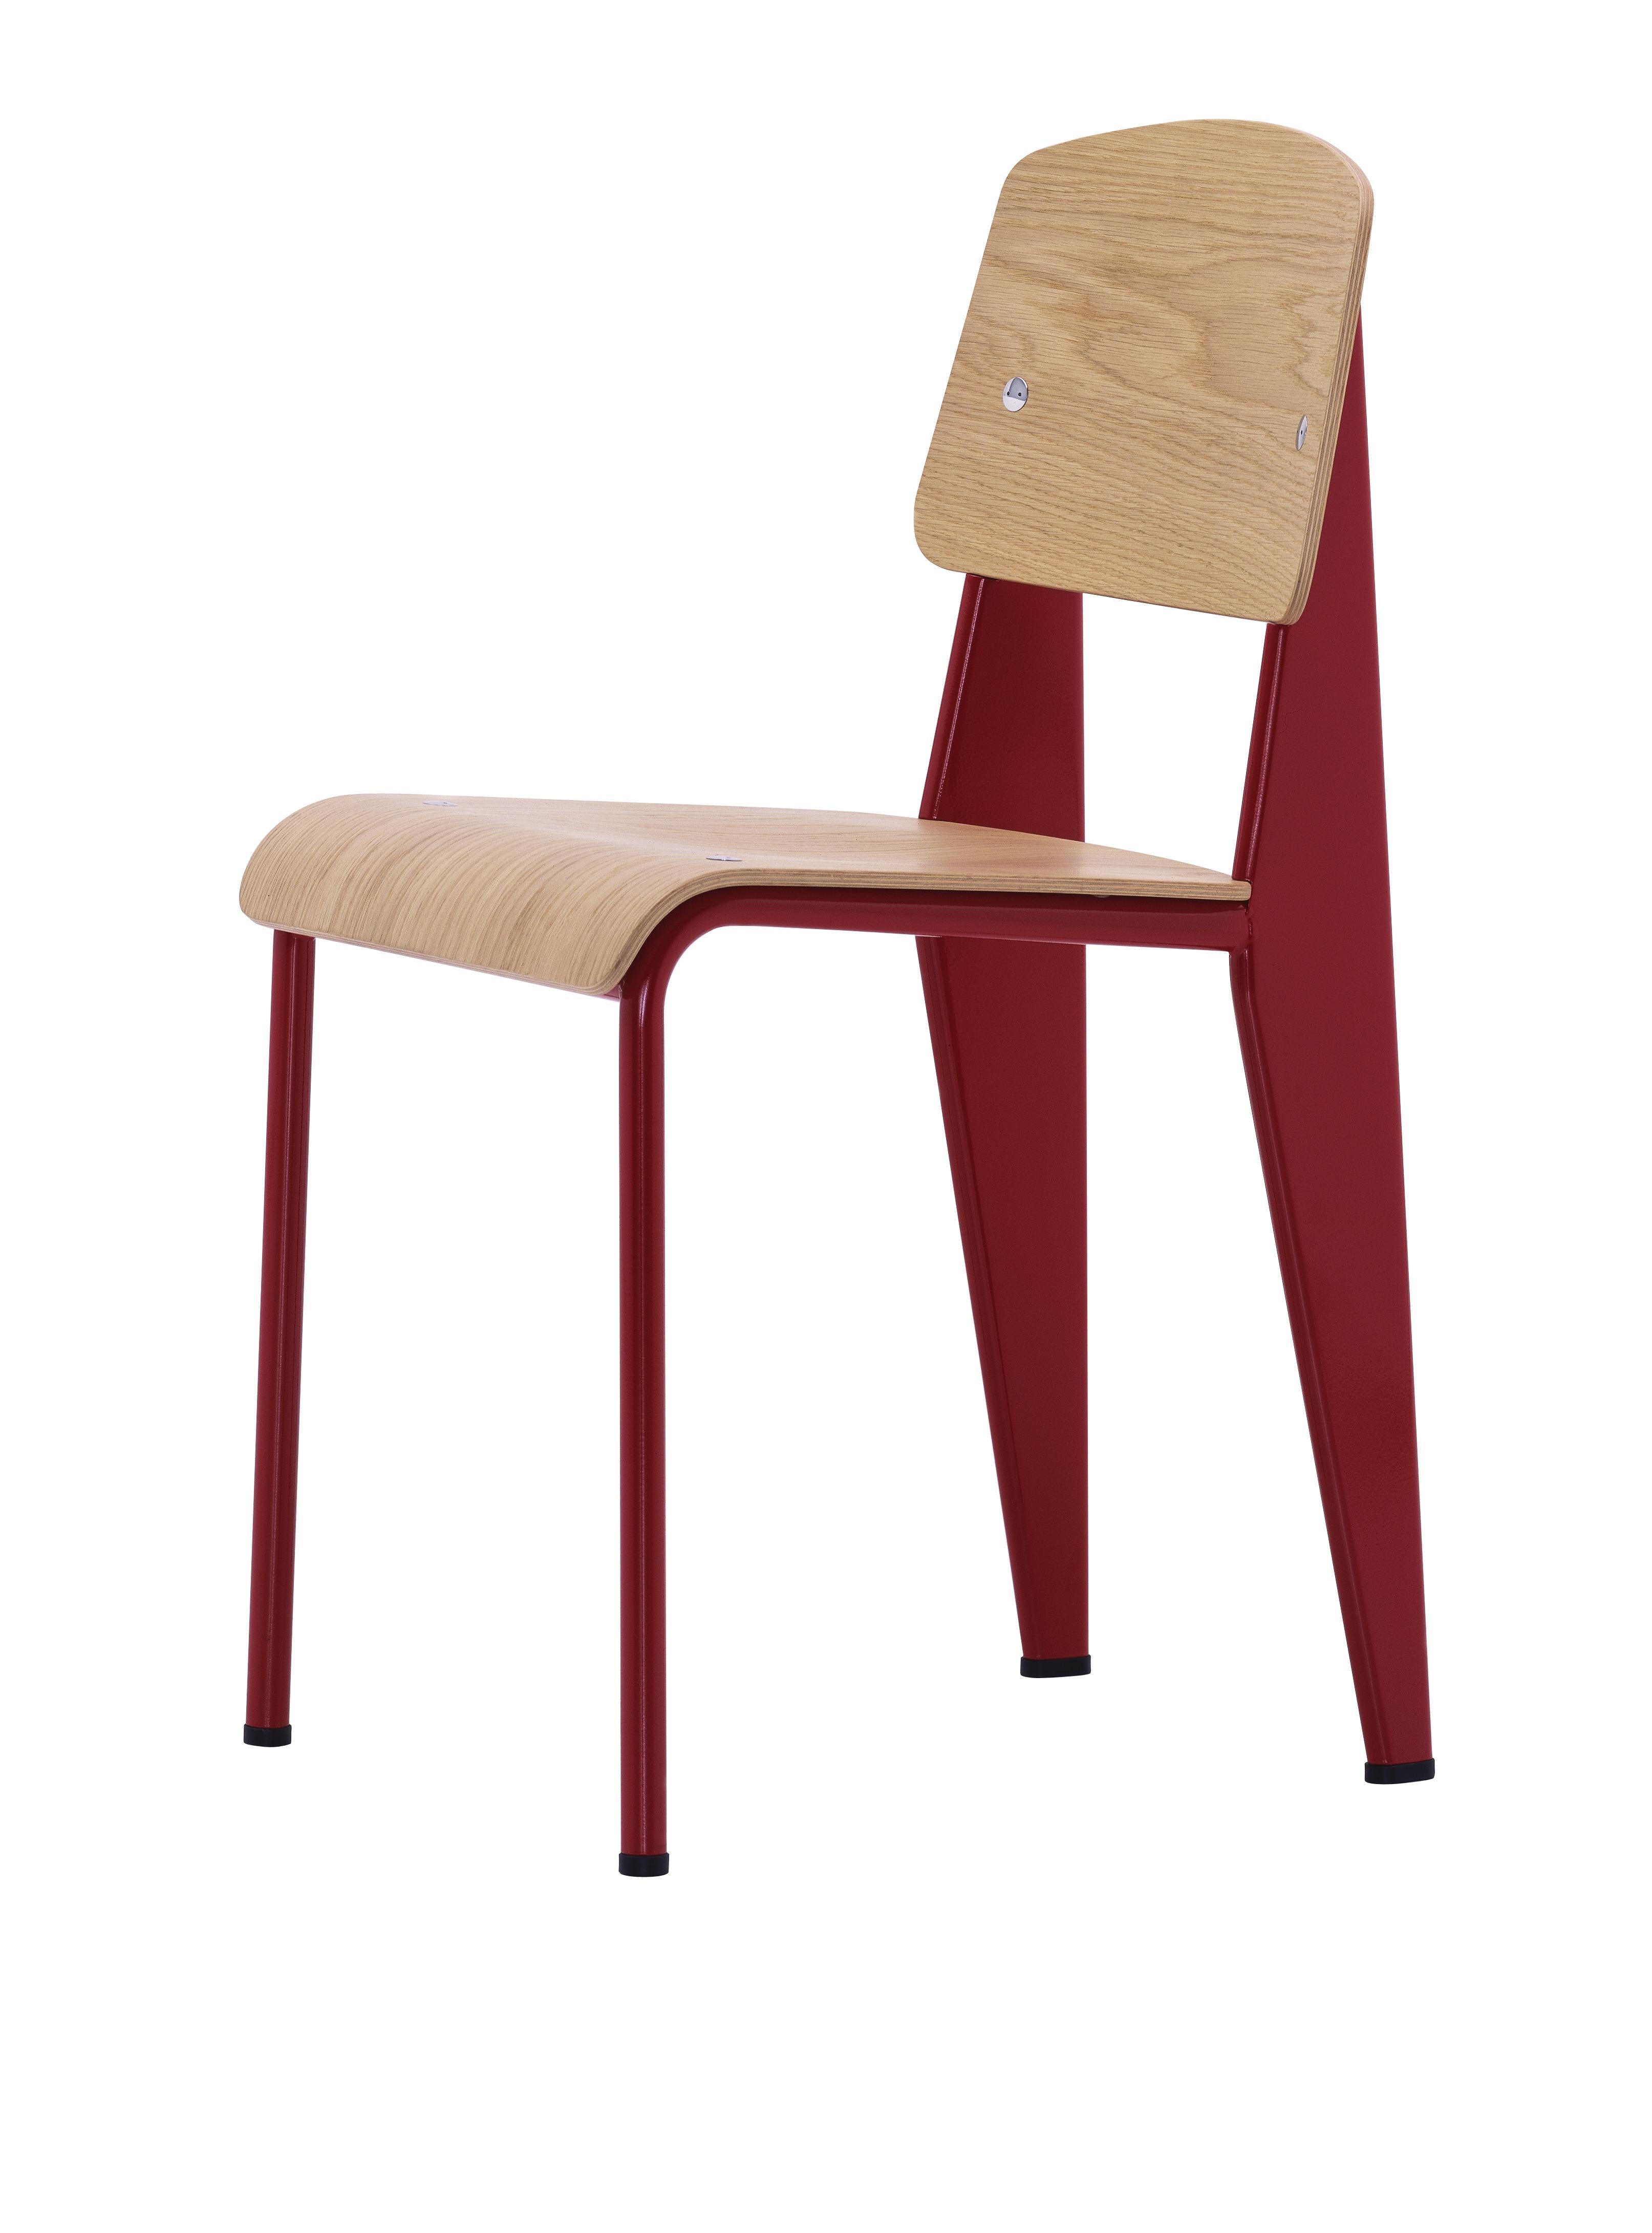 These items are currently only available in the United States.

Chairs take the most stress on their backlegs, where they bear the weight of the user‘s upper body. The engineer, architect and designer Jean Prouvé incorporated this simple insight in